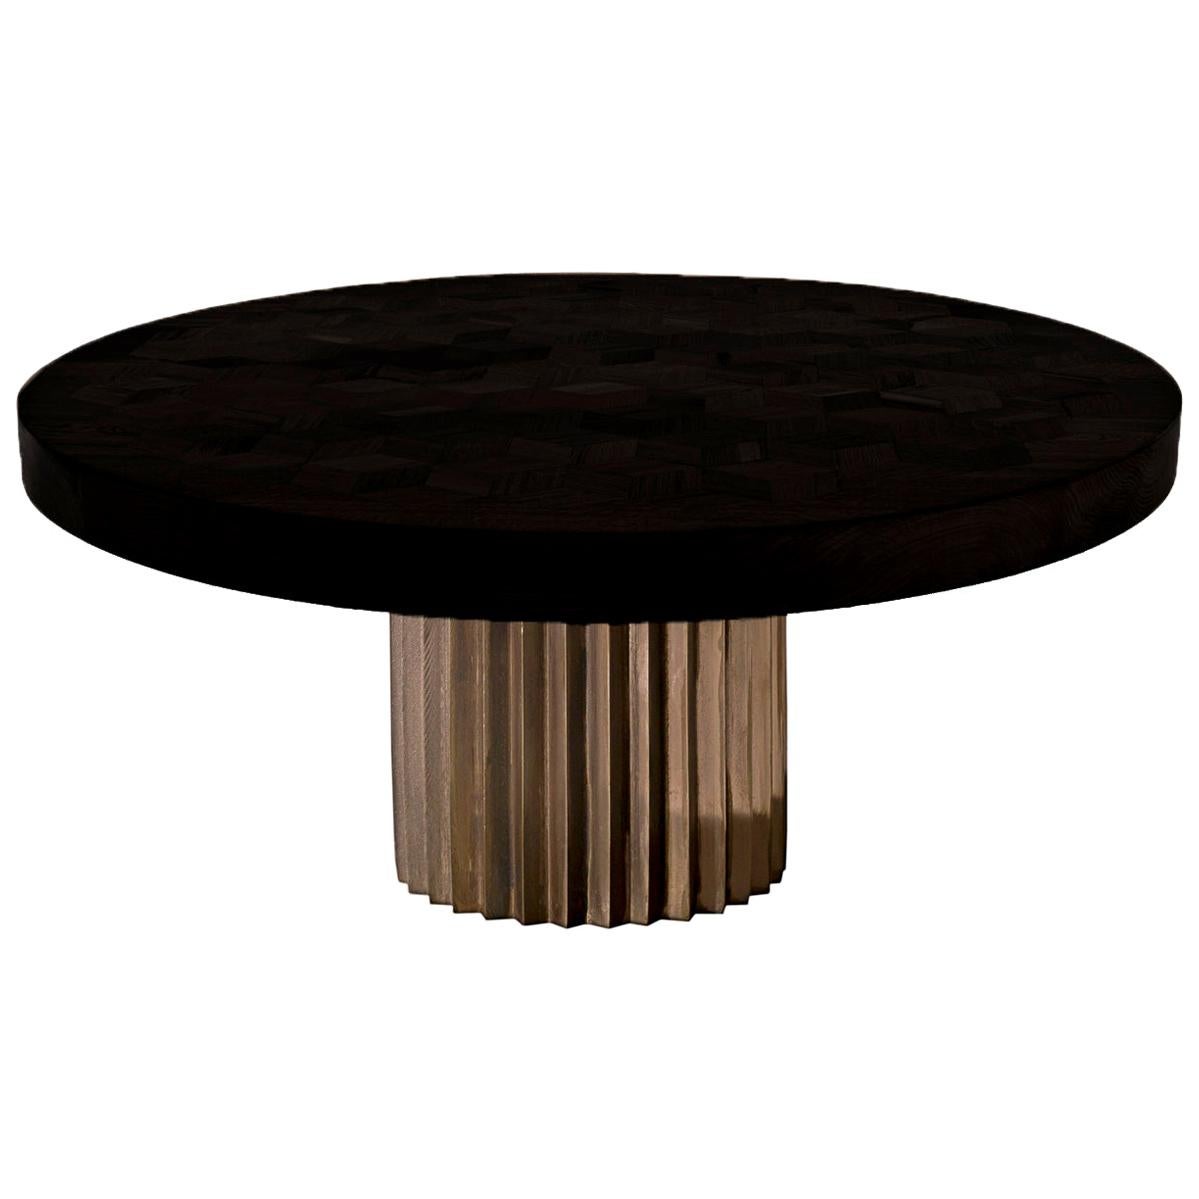 Doris Round Marquetry Table in Ebonized Reclaimed Oak with Cast Bronze Pedestal